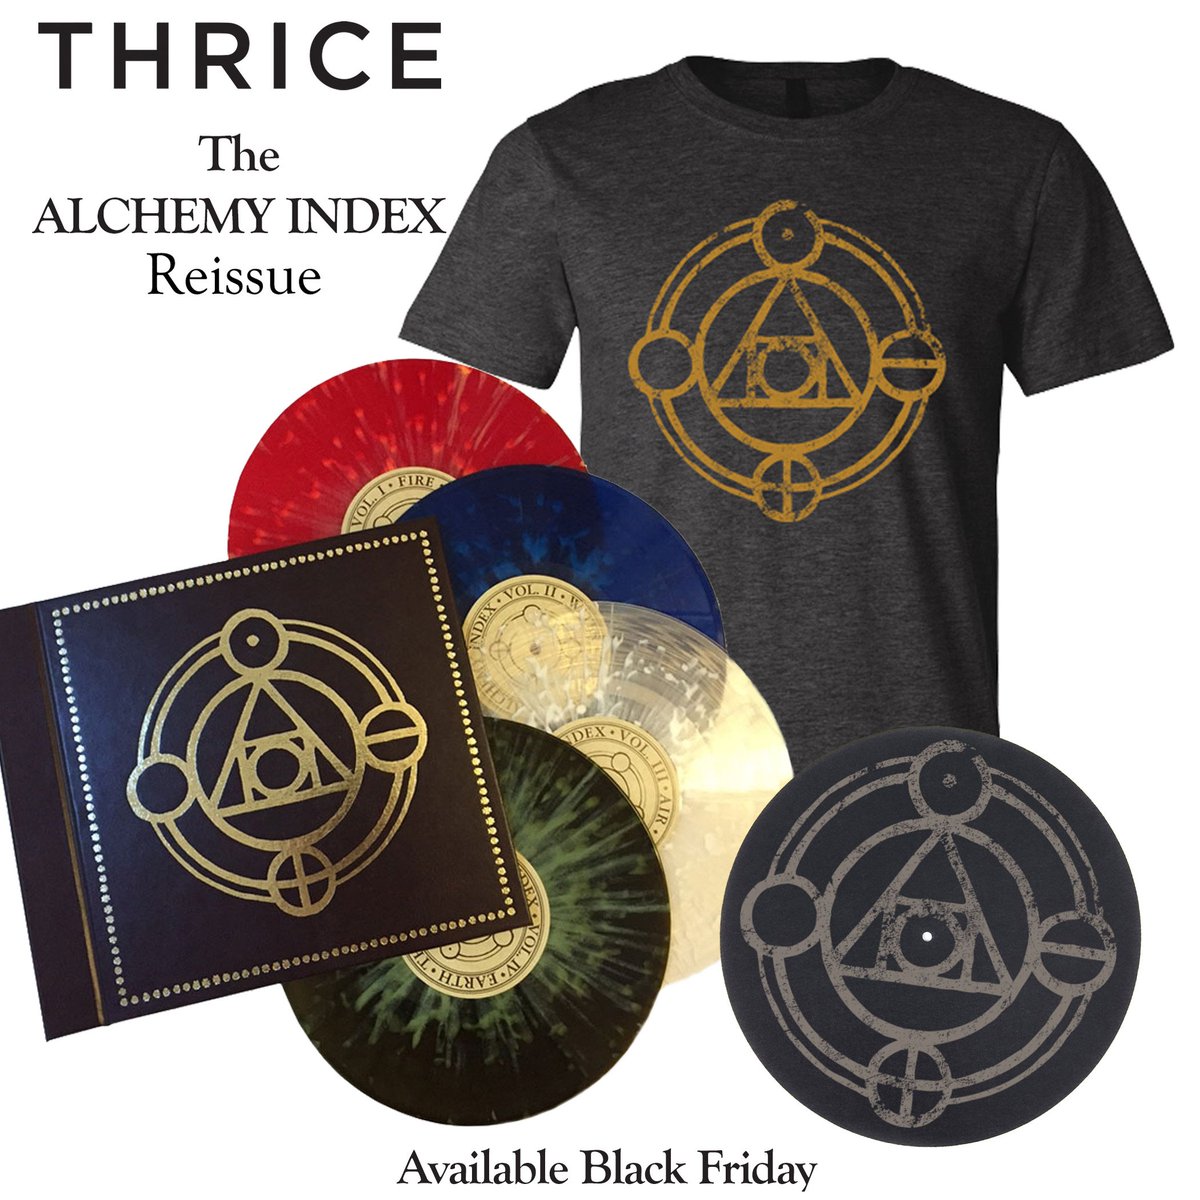 Thrice On Twitter We Re Excited To Announce That Tai Is Being Released On Vinyl Again The Original Pressing Is One Of The Best Pieces We Ever Put Out The Reissue Is